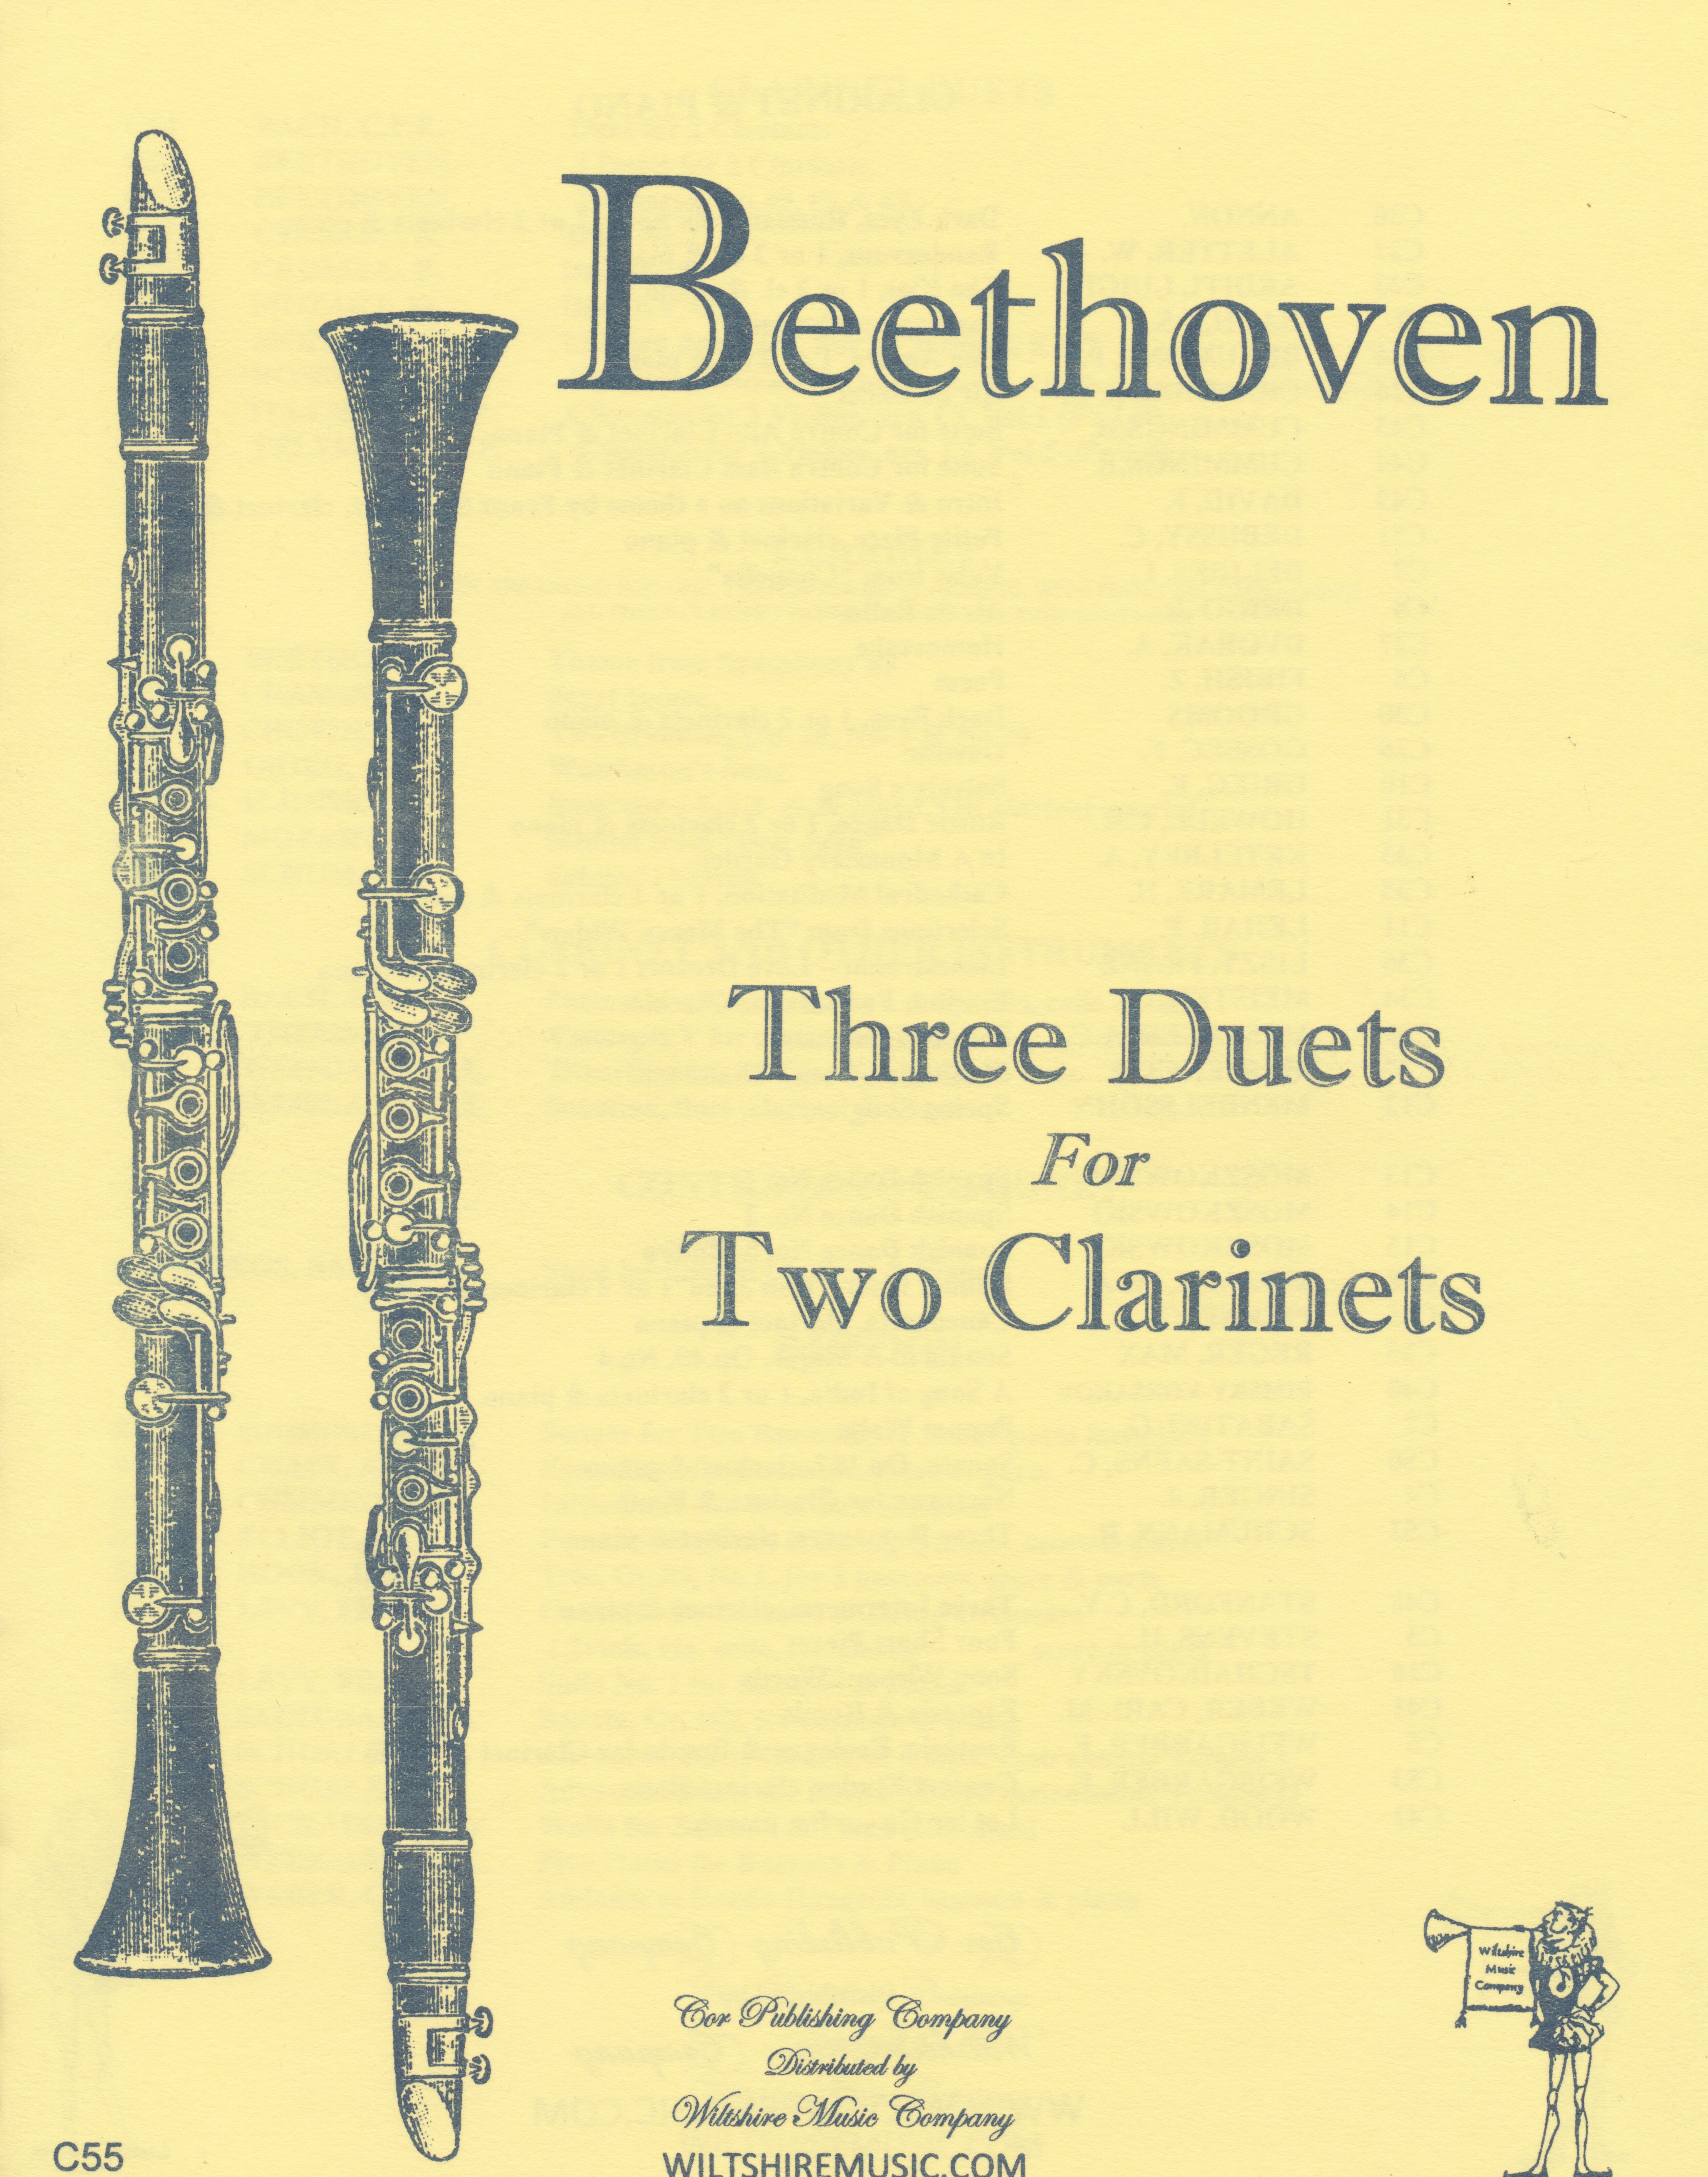 Three Duets for Two Clarinets, Beethoven